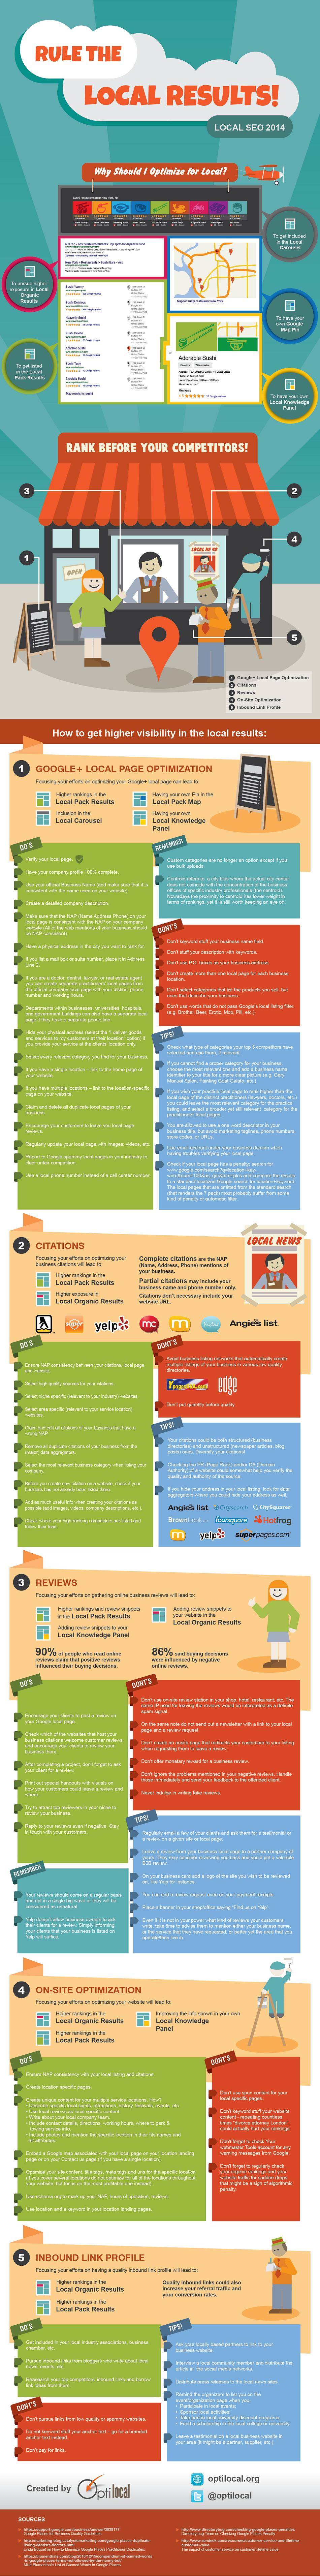 Optilocal Infographic Rule the Local Results